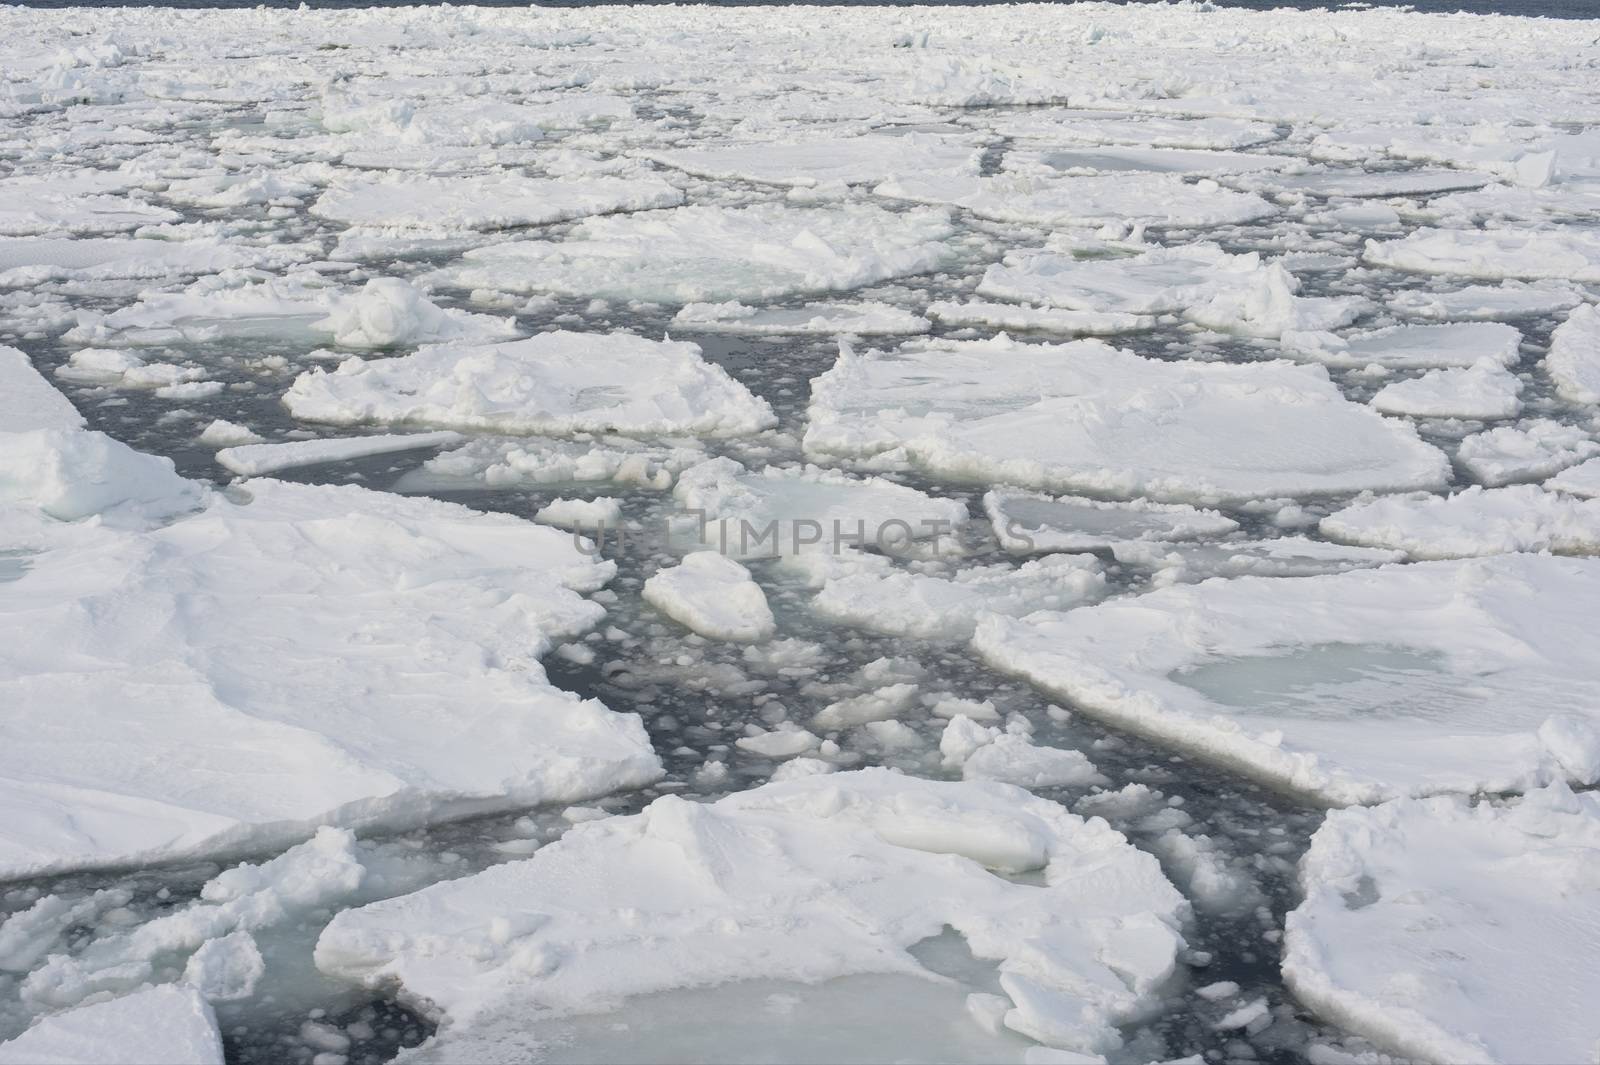 Drift ice in Abashini, Japan which has broken away from the shore or glaciers in small floes which can be driven into a dense mass by the wind to form pack ice , as viewed from the Aurora icebreaker